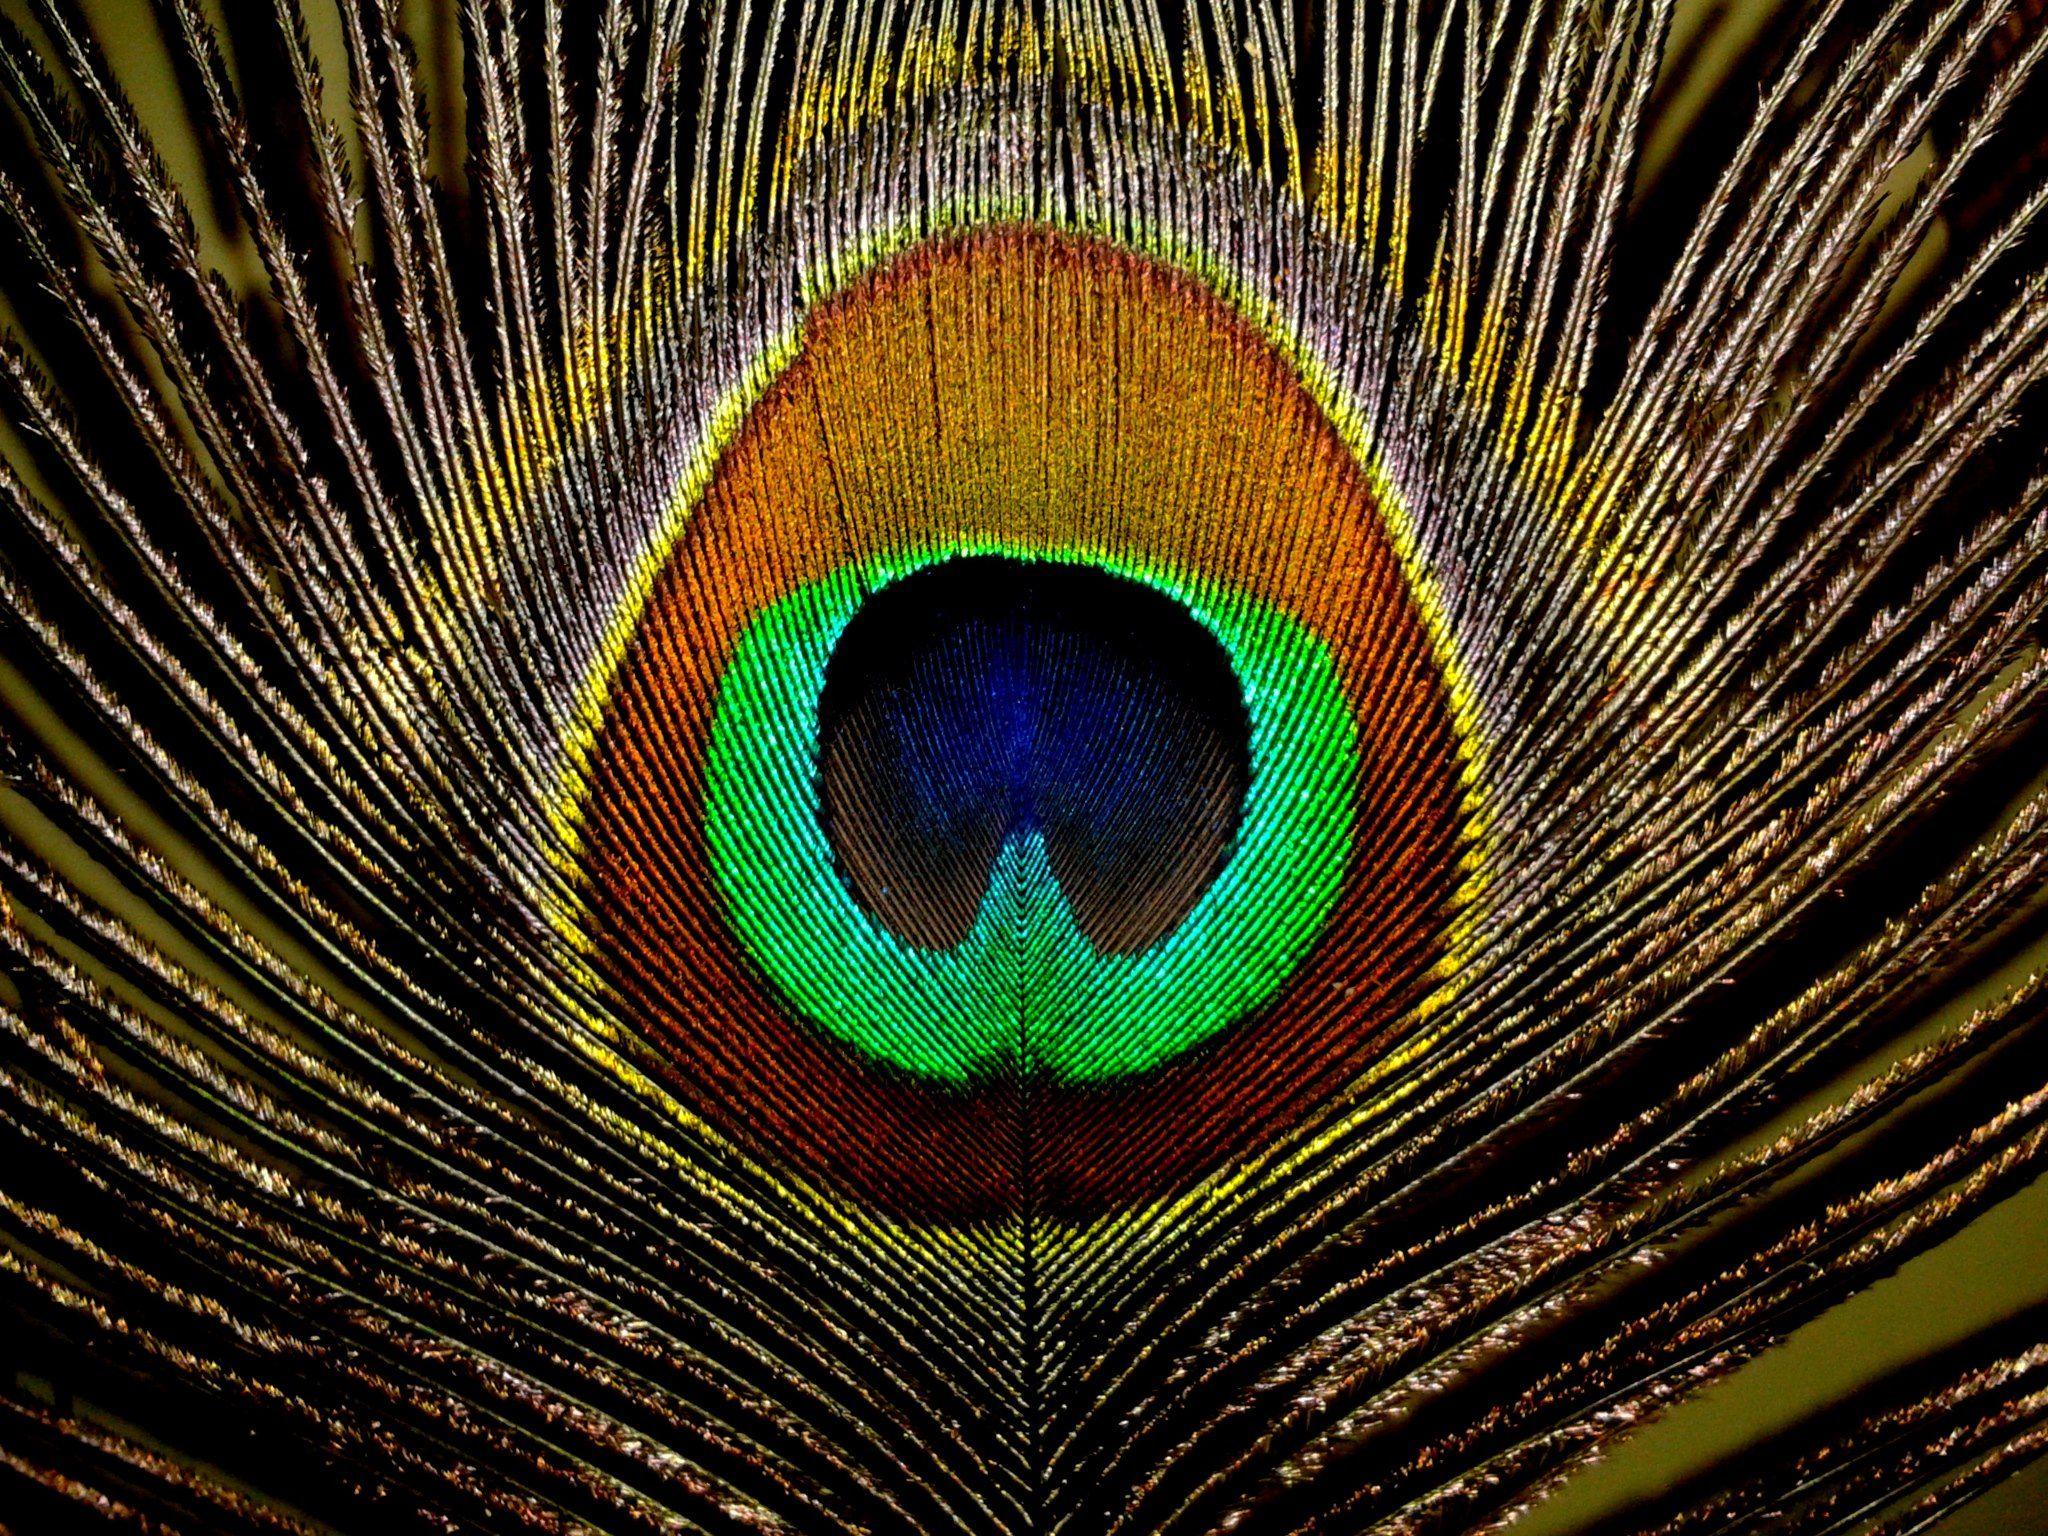 Peacock Feathers HD Wallpaper, Peacock Feathers BackgroundNew